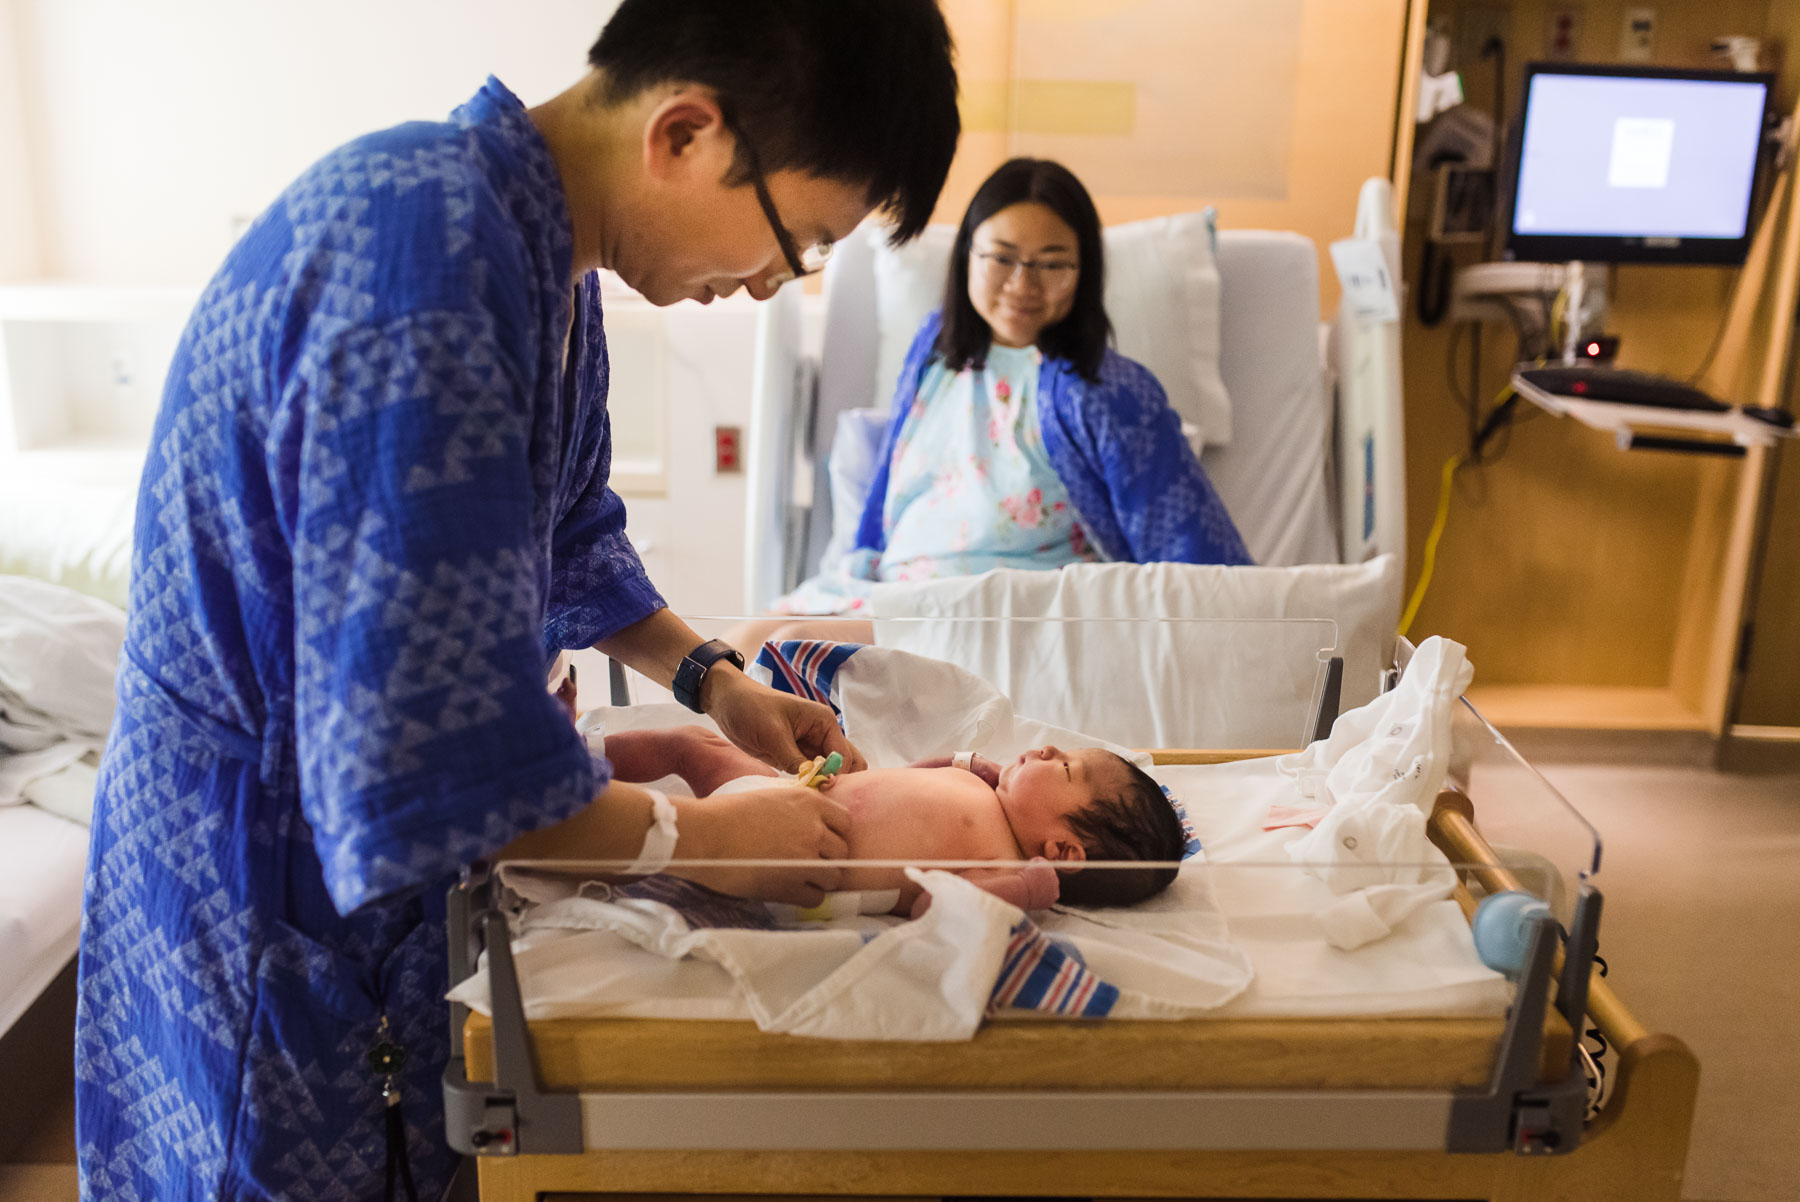 dad changing baby's diaper in hospital while mom looks on